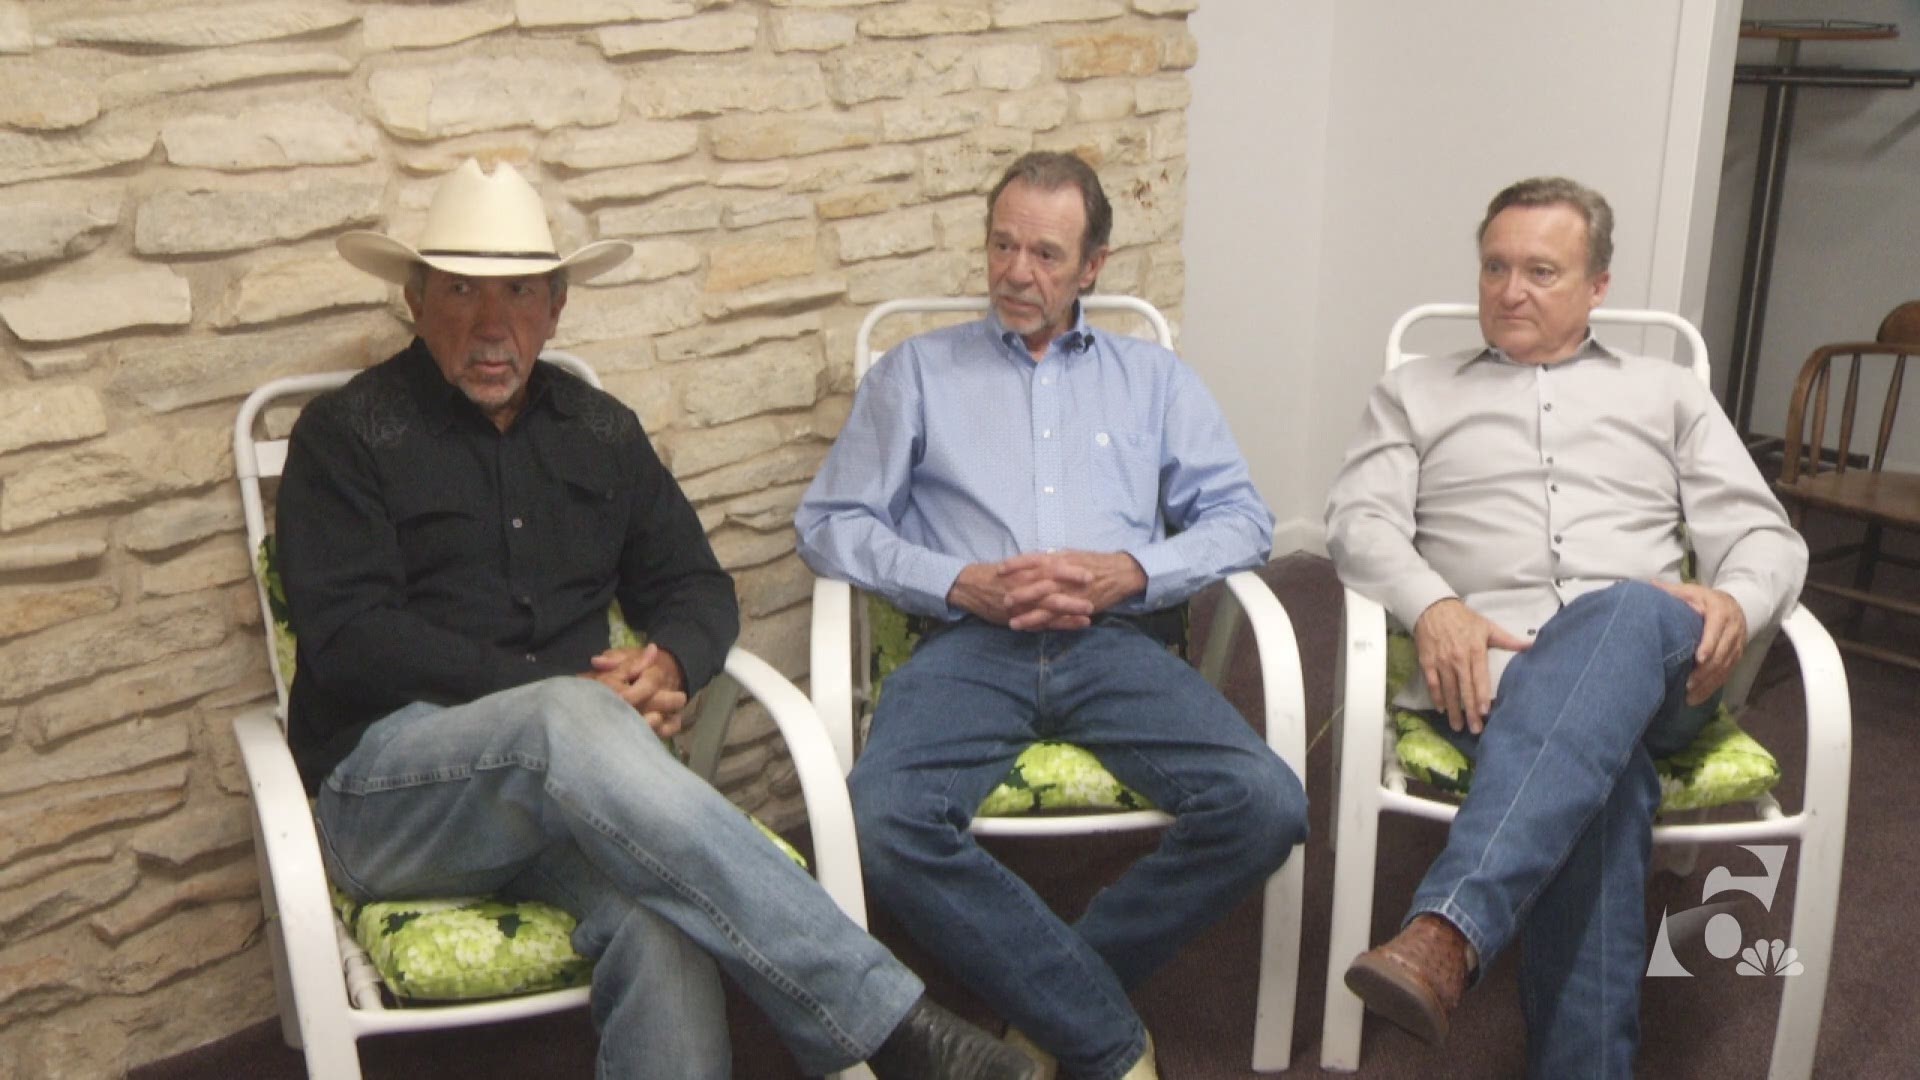 Three members of the famous Ace in the Hole band sit down with KCEN's Kurtis Quillin before a private performance in Salado, Texas.